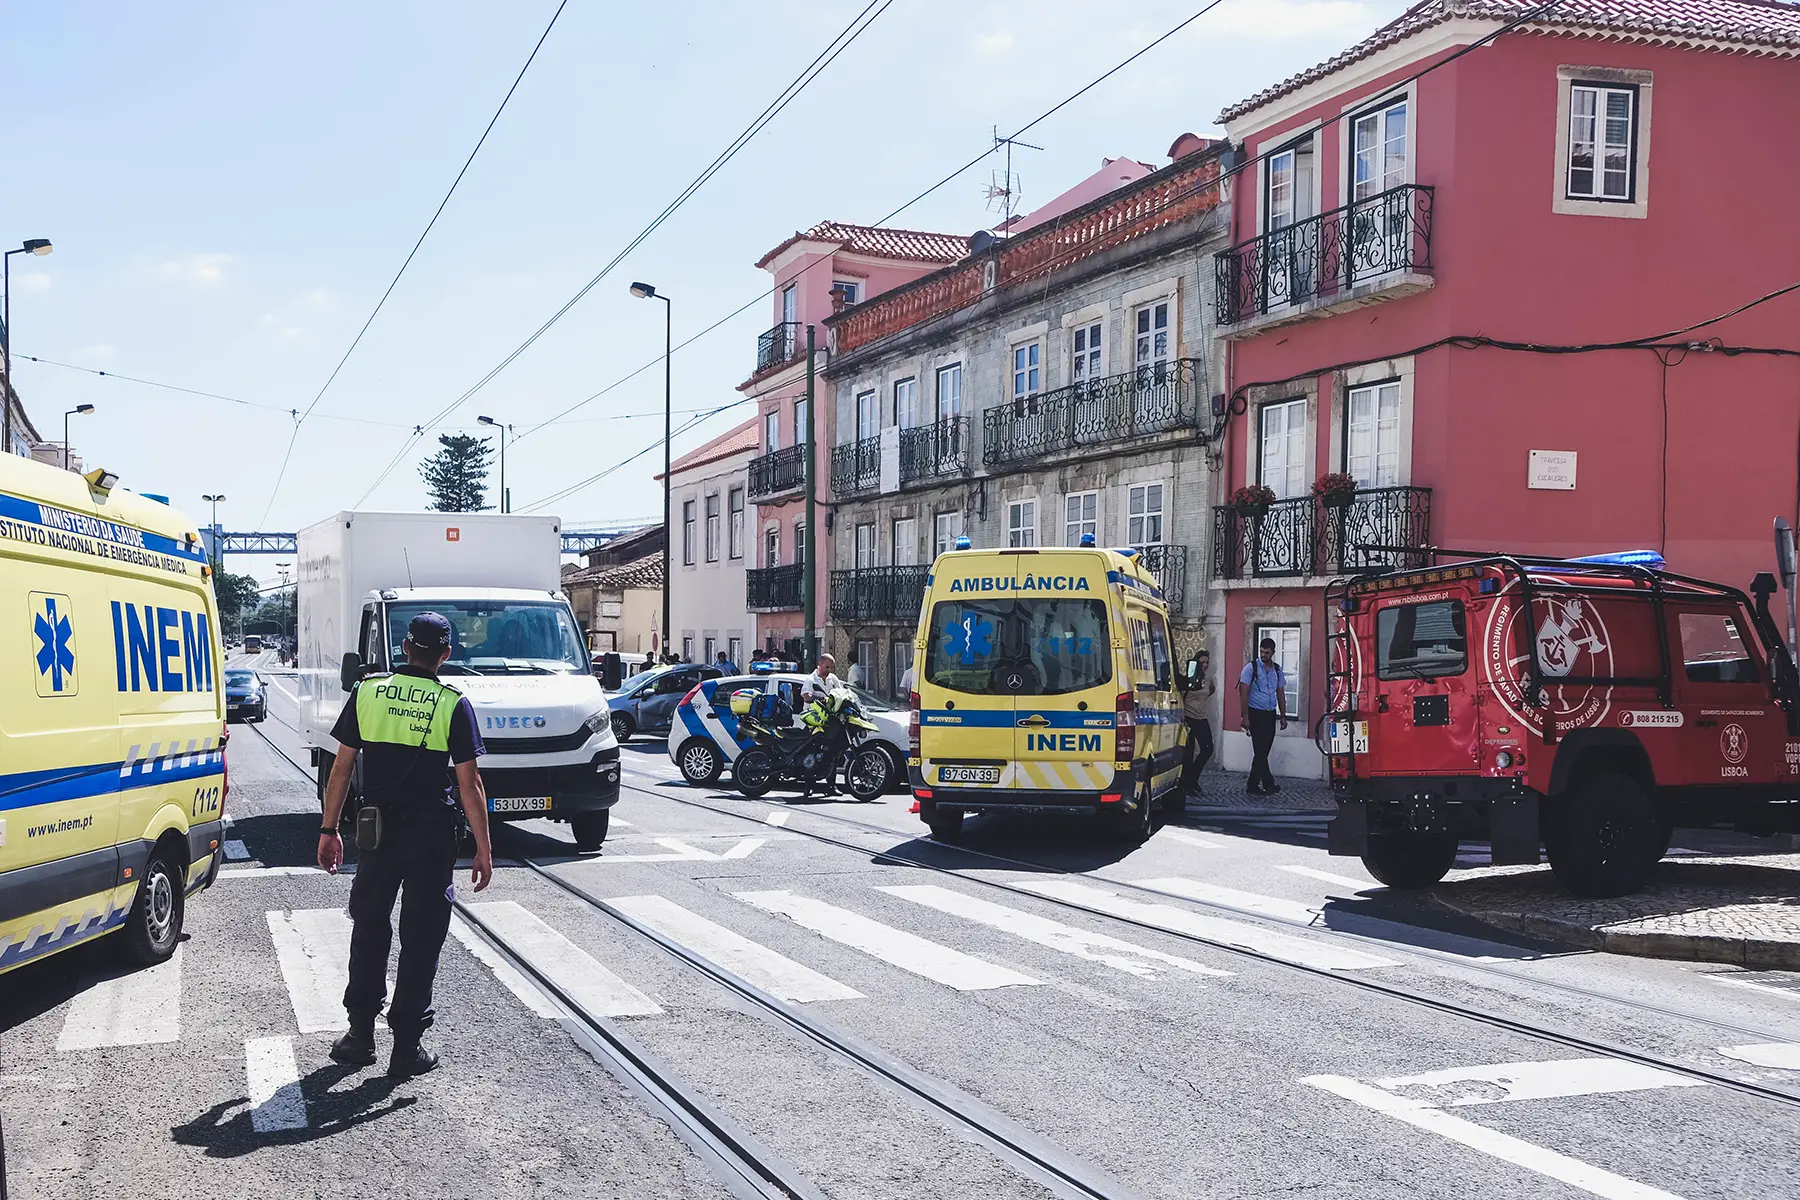 Emergency services responding to a car crash in Lisbon, Portugal